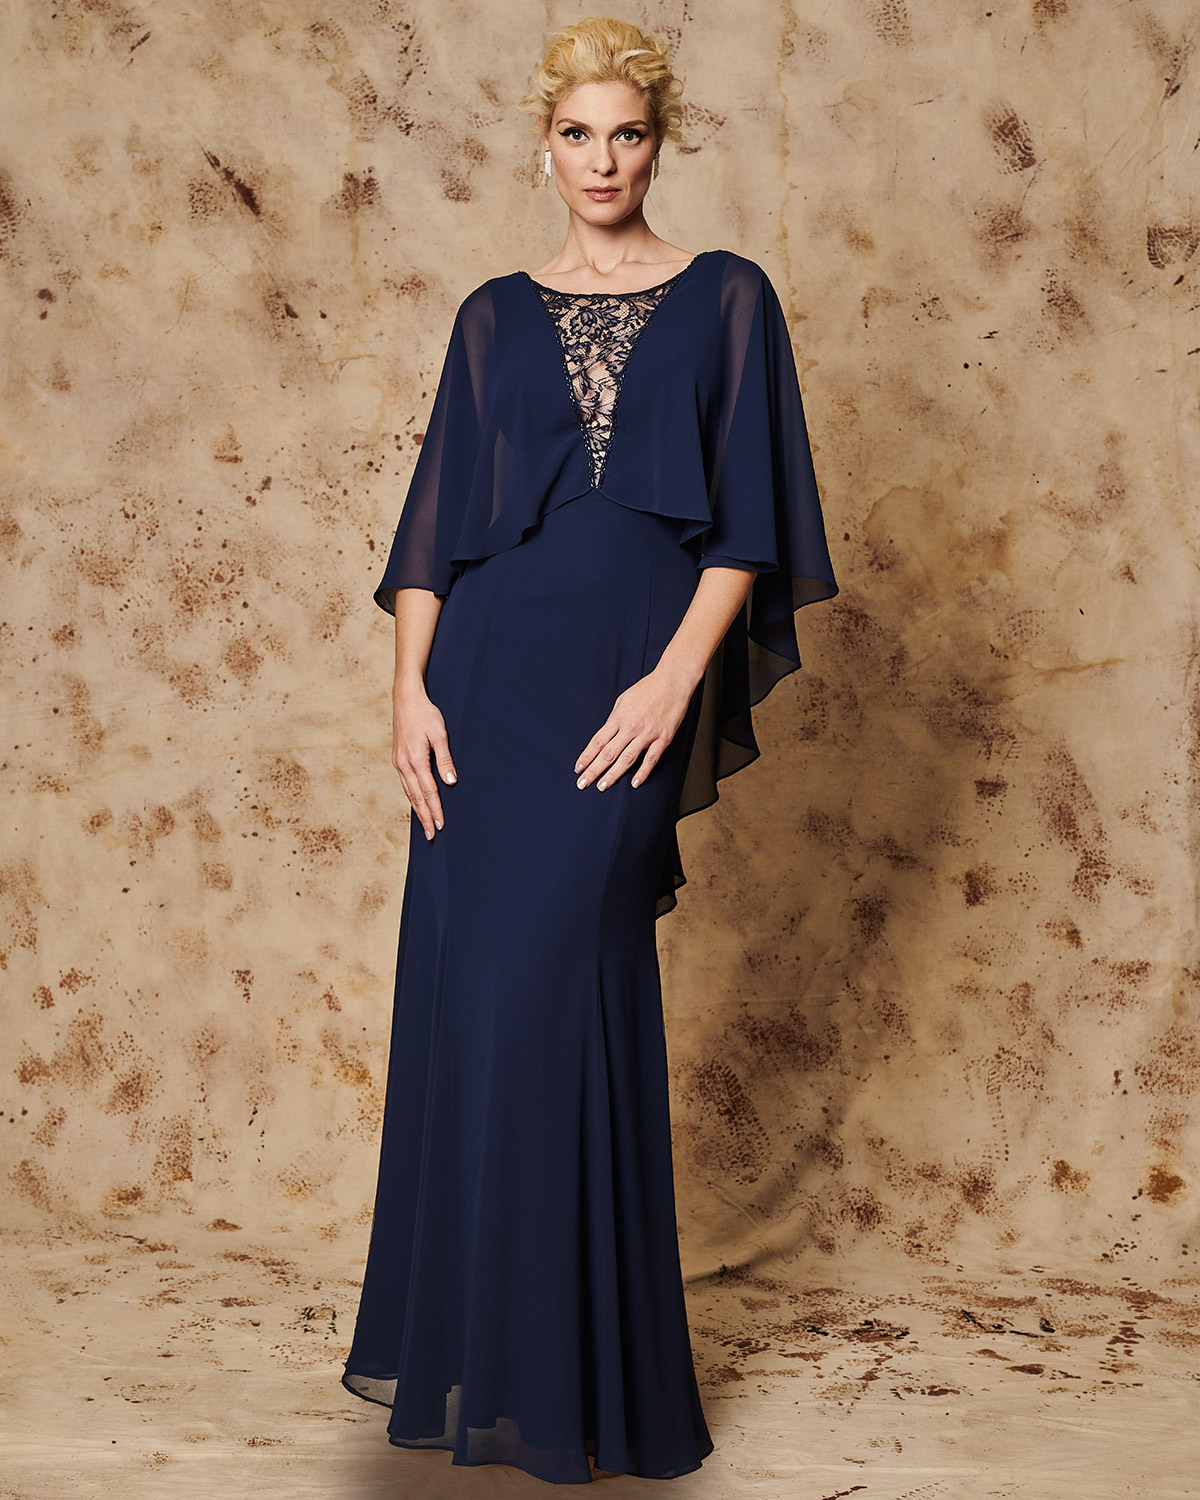 Classic Dresses / Long Evening Dress with wide sleeves and lace details